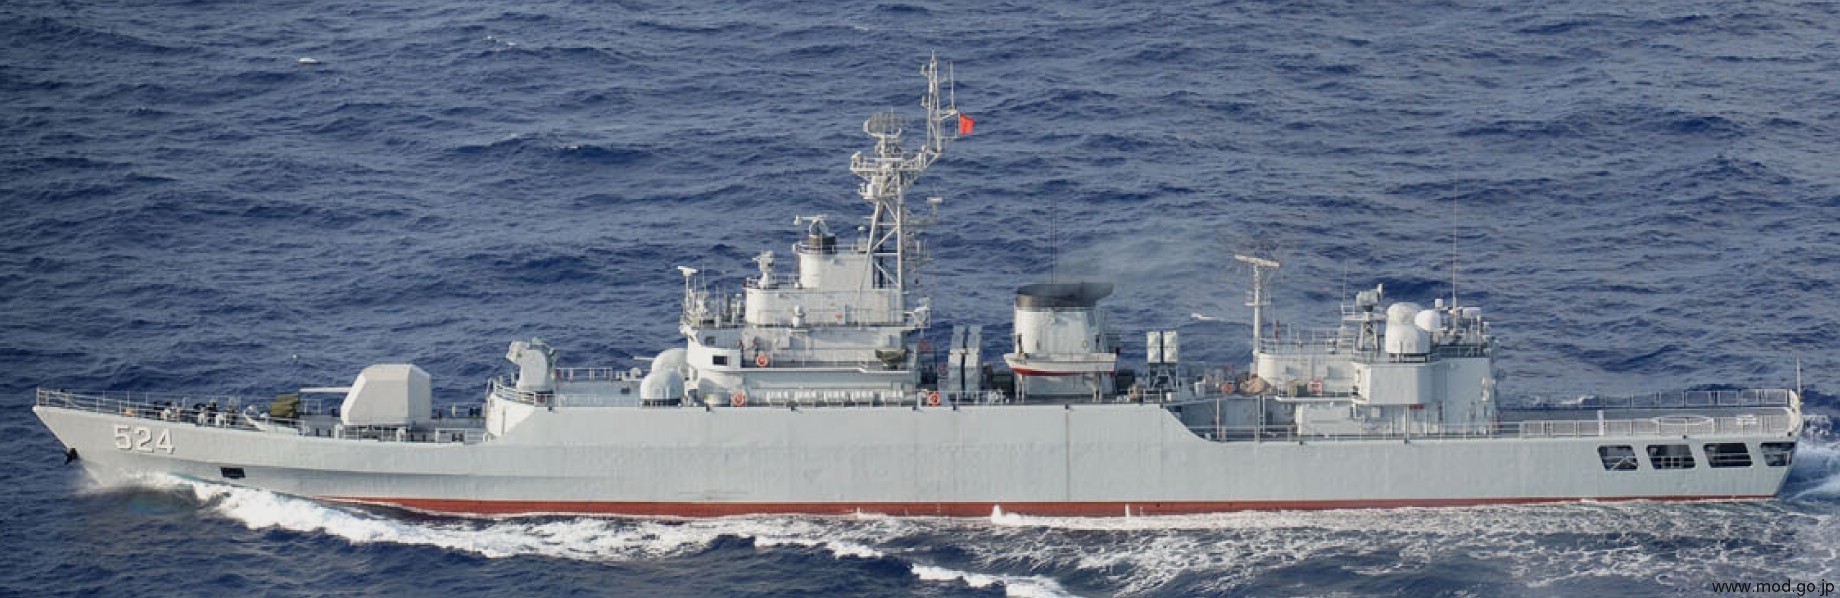 ffg-524 plans sanming type 053h3 jiangwei ii class guided missile frigate people's liberation army navy china 02